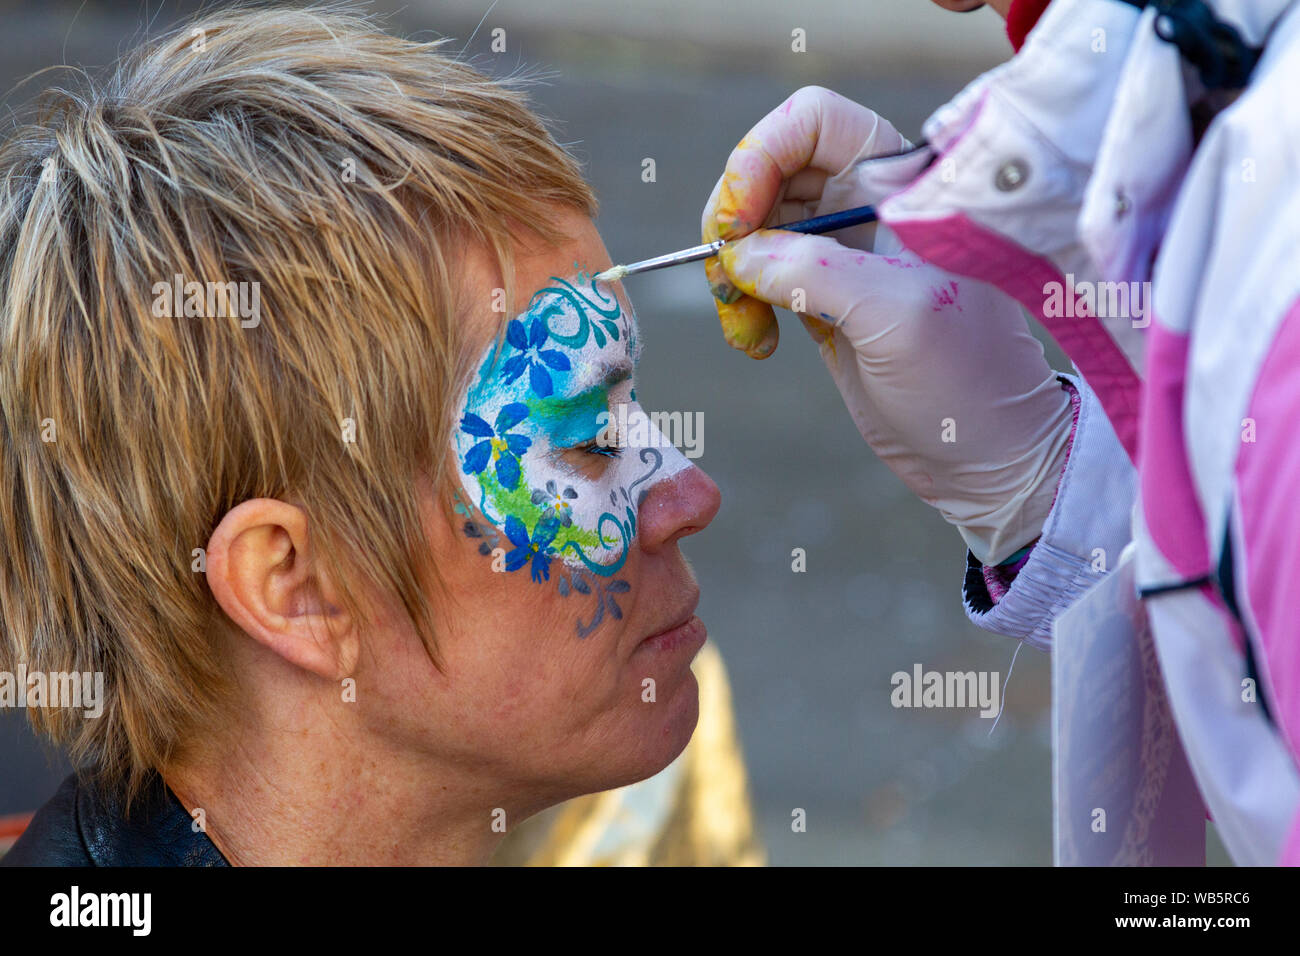 Painting on the face during Carnival. Stock Photo